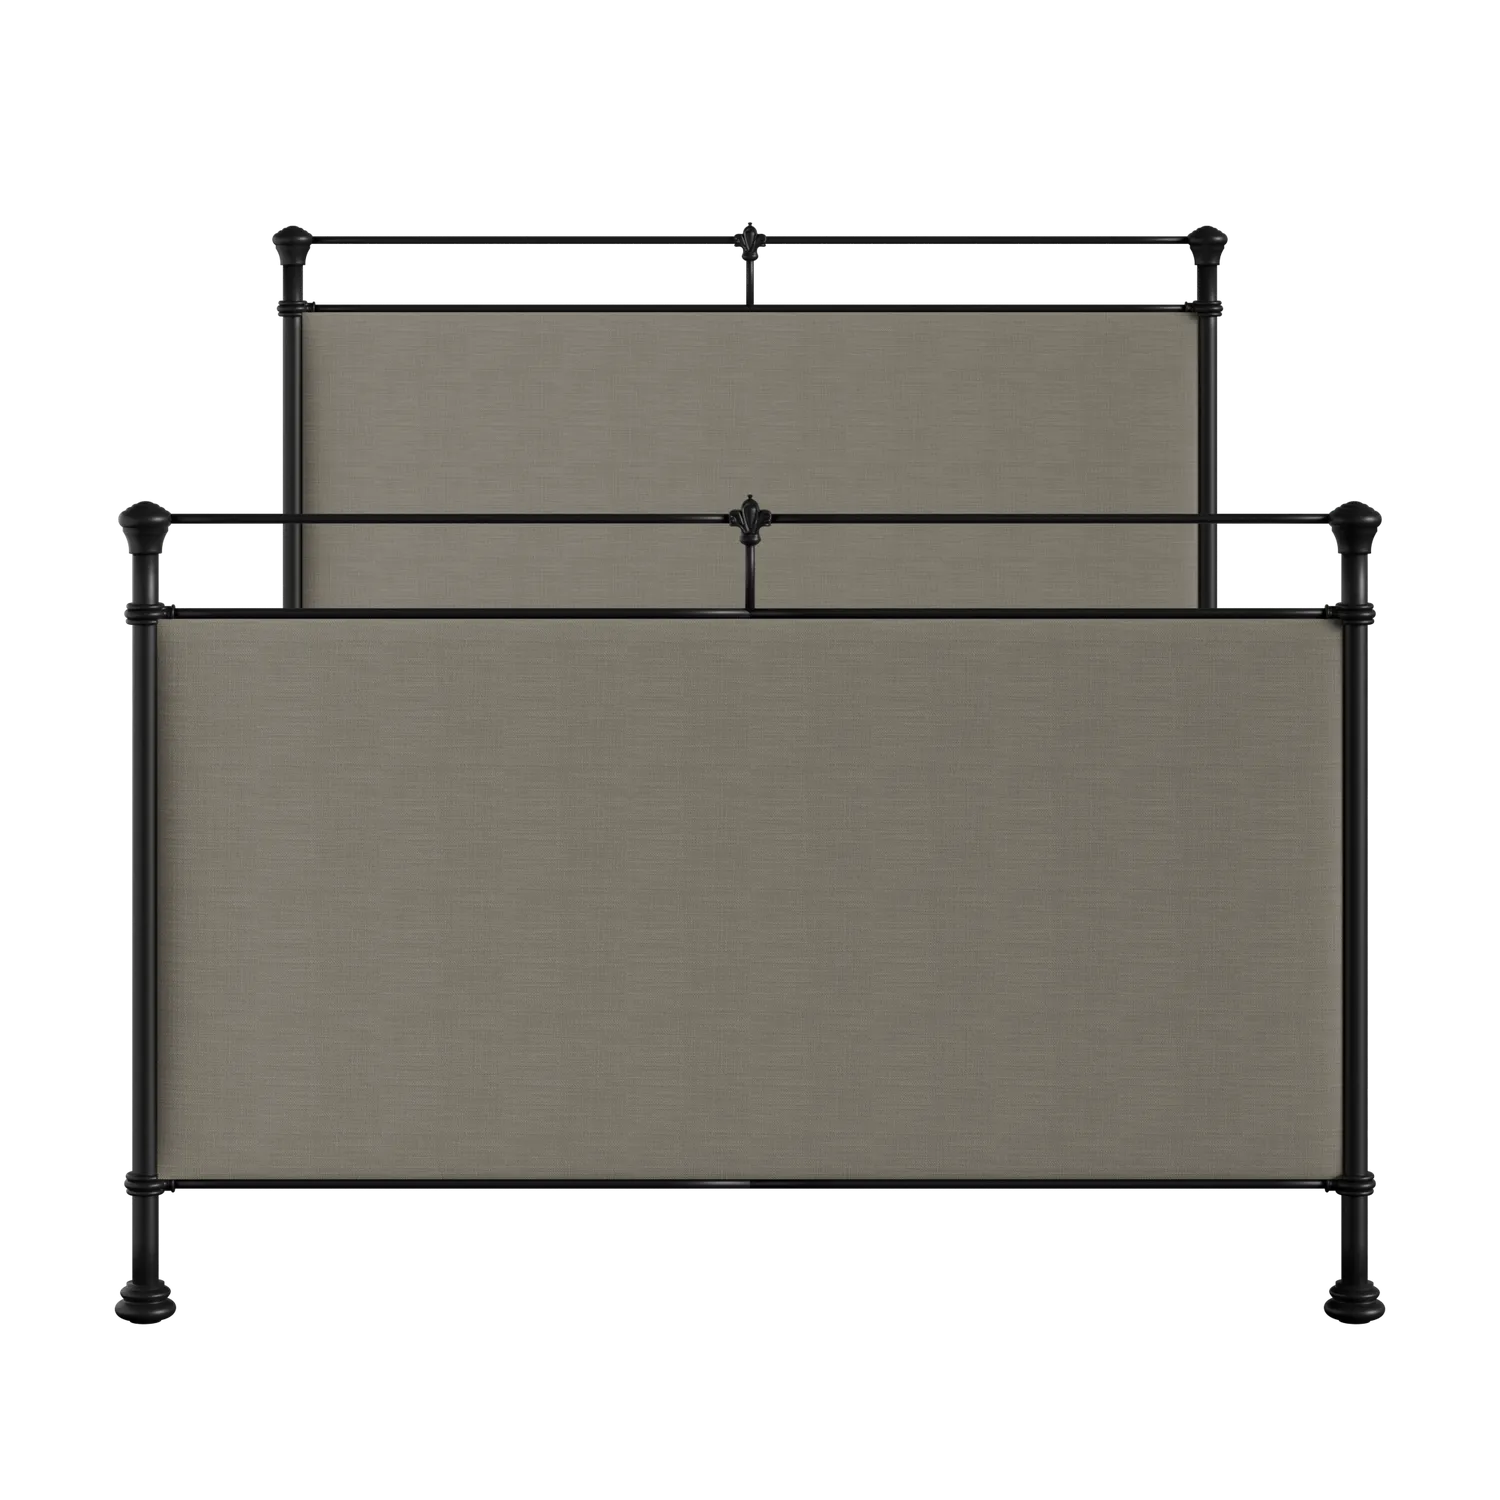 Lille iron/metal upholstered bed in black with grey fabric